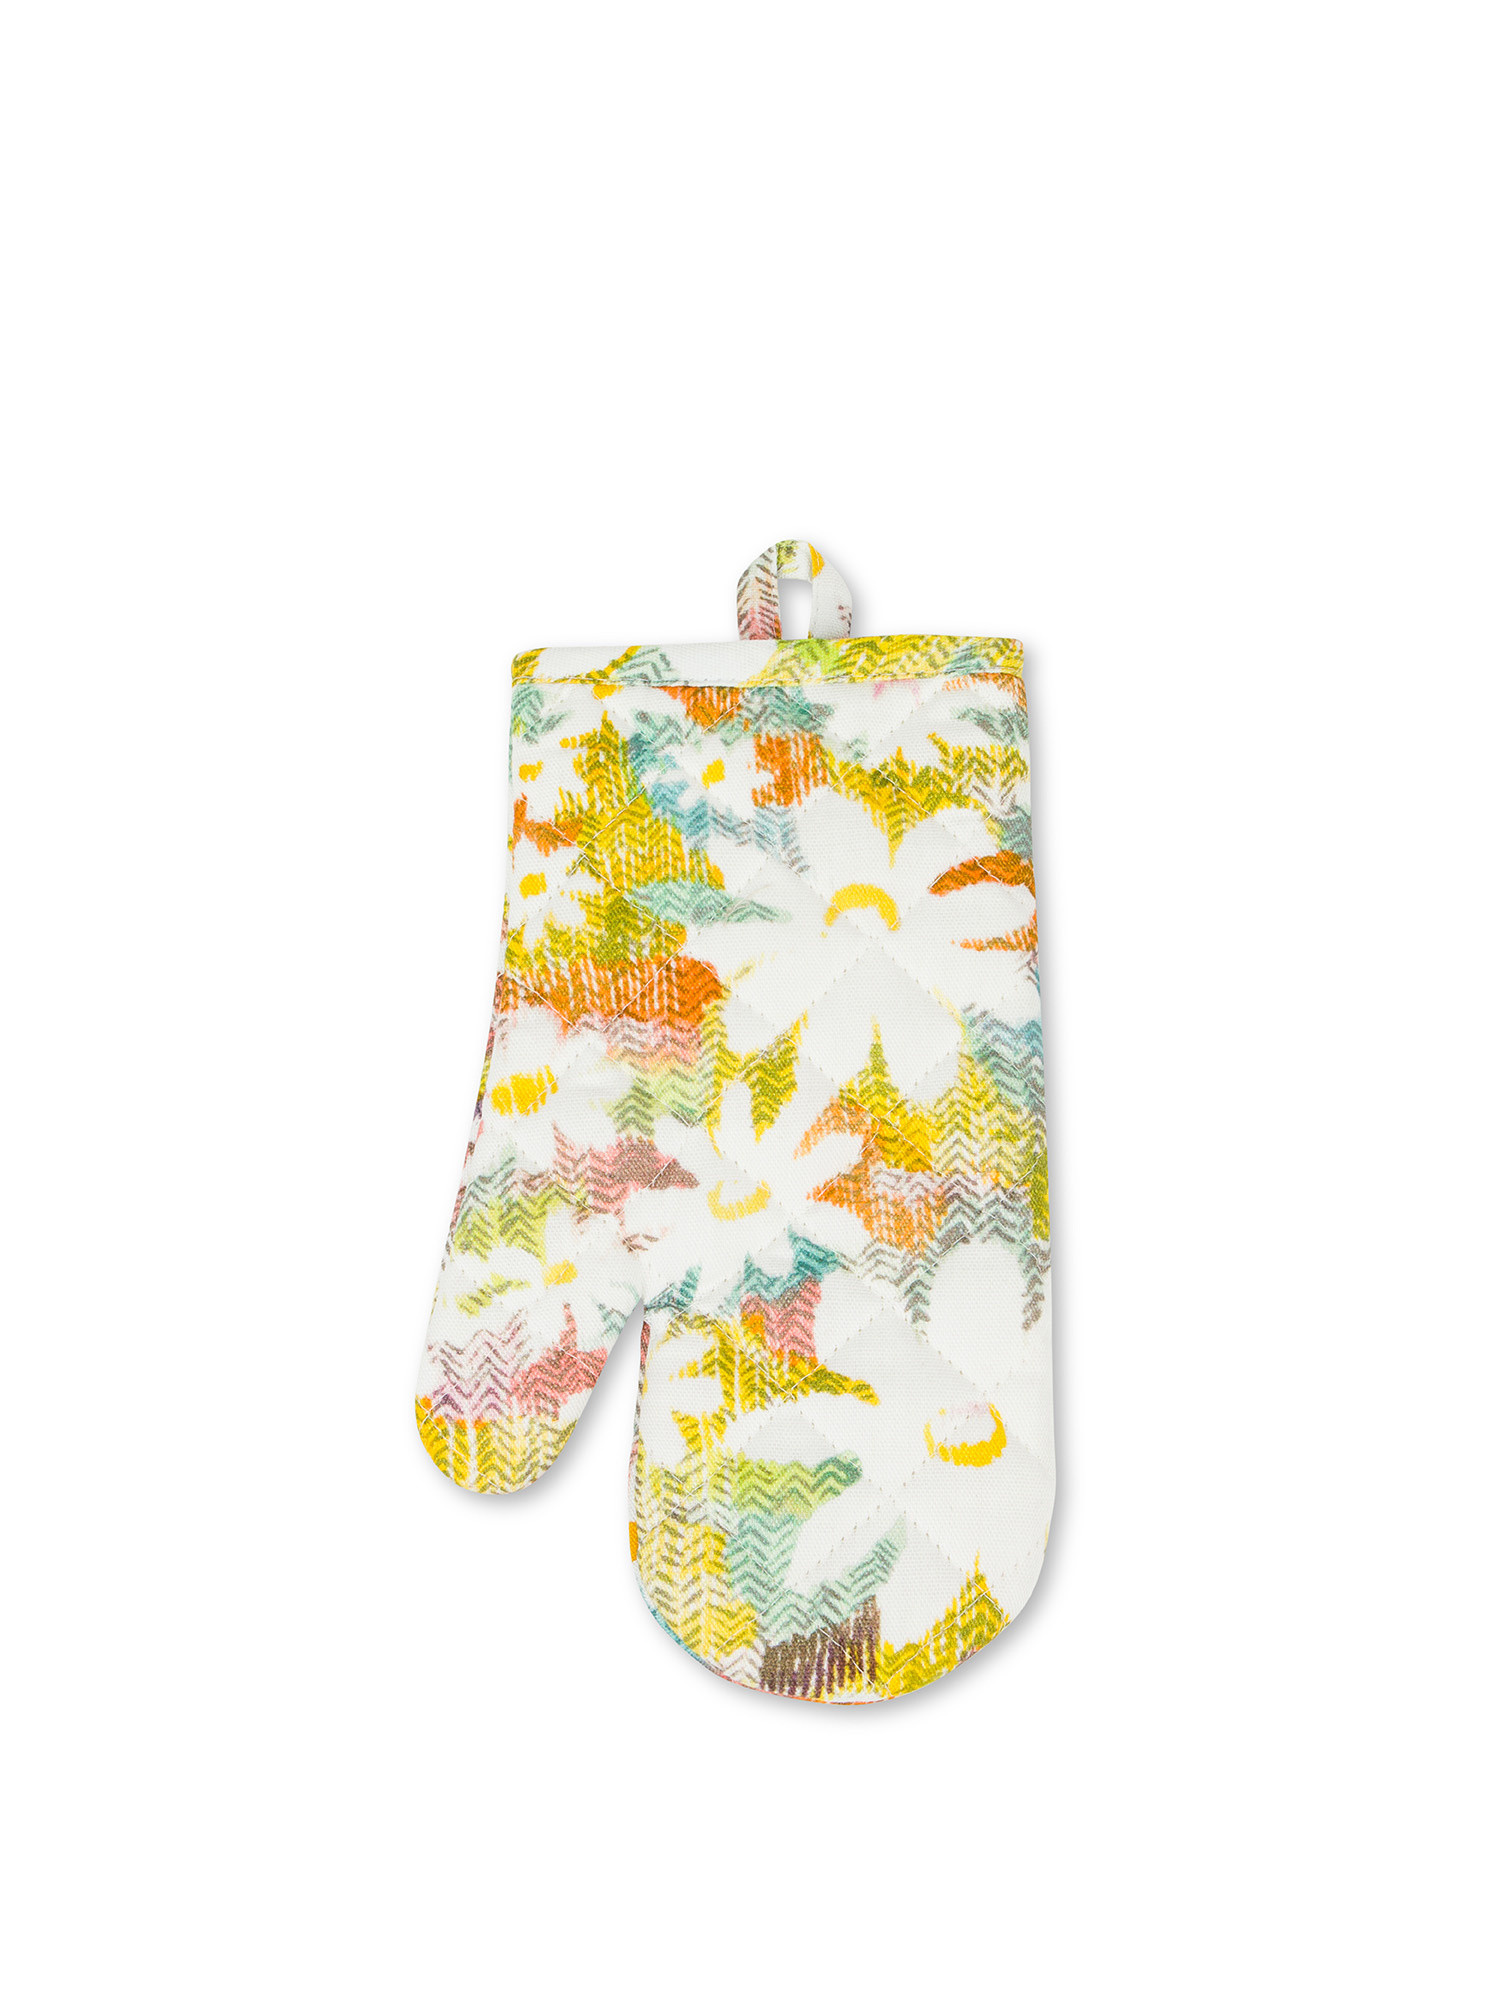 Daisy print cotton kitchen glove, Multicolor, large image number 0